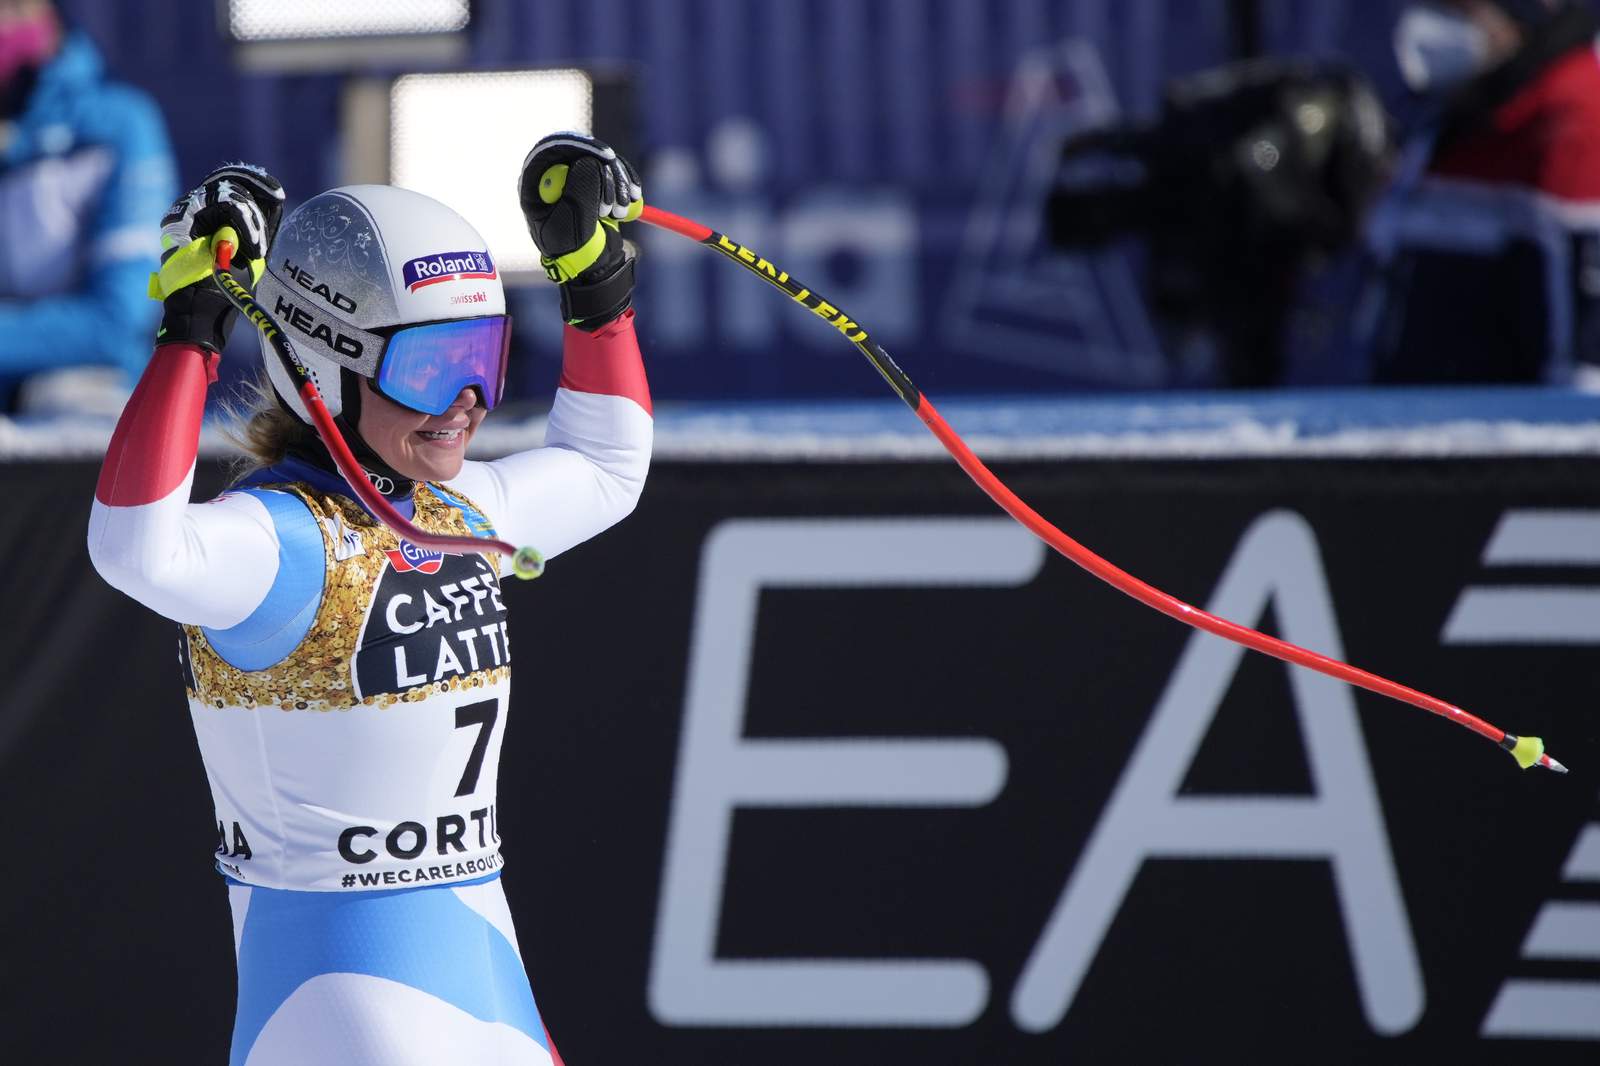 The Latest: Suter wins downhill for 2nd Swiss gold at worlds